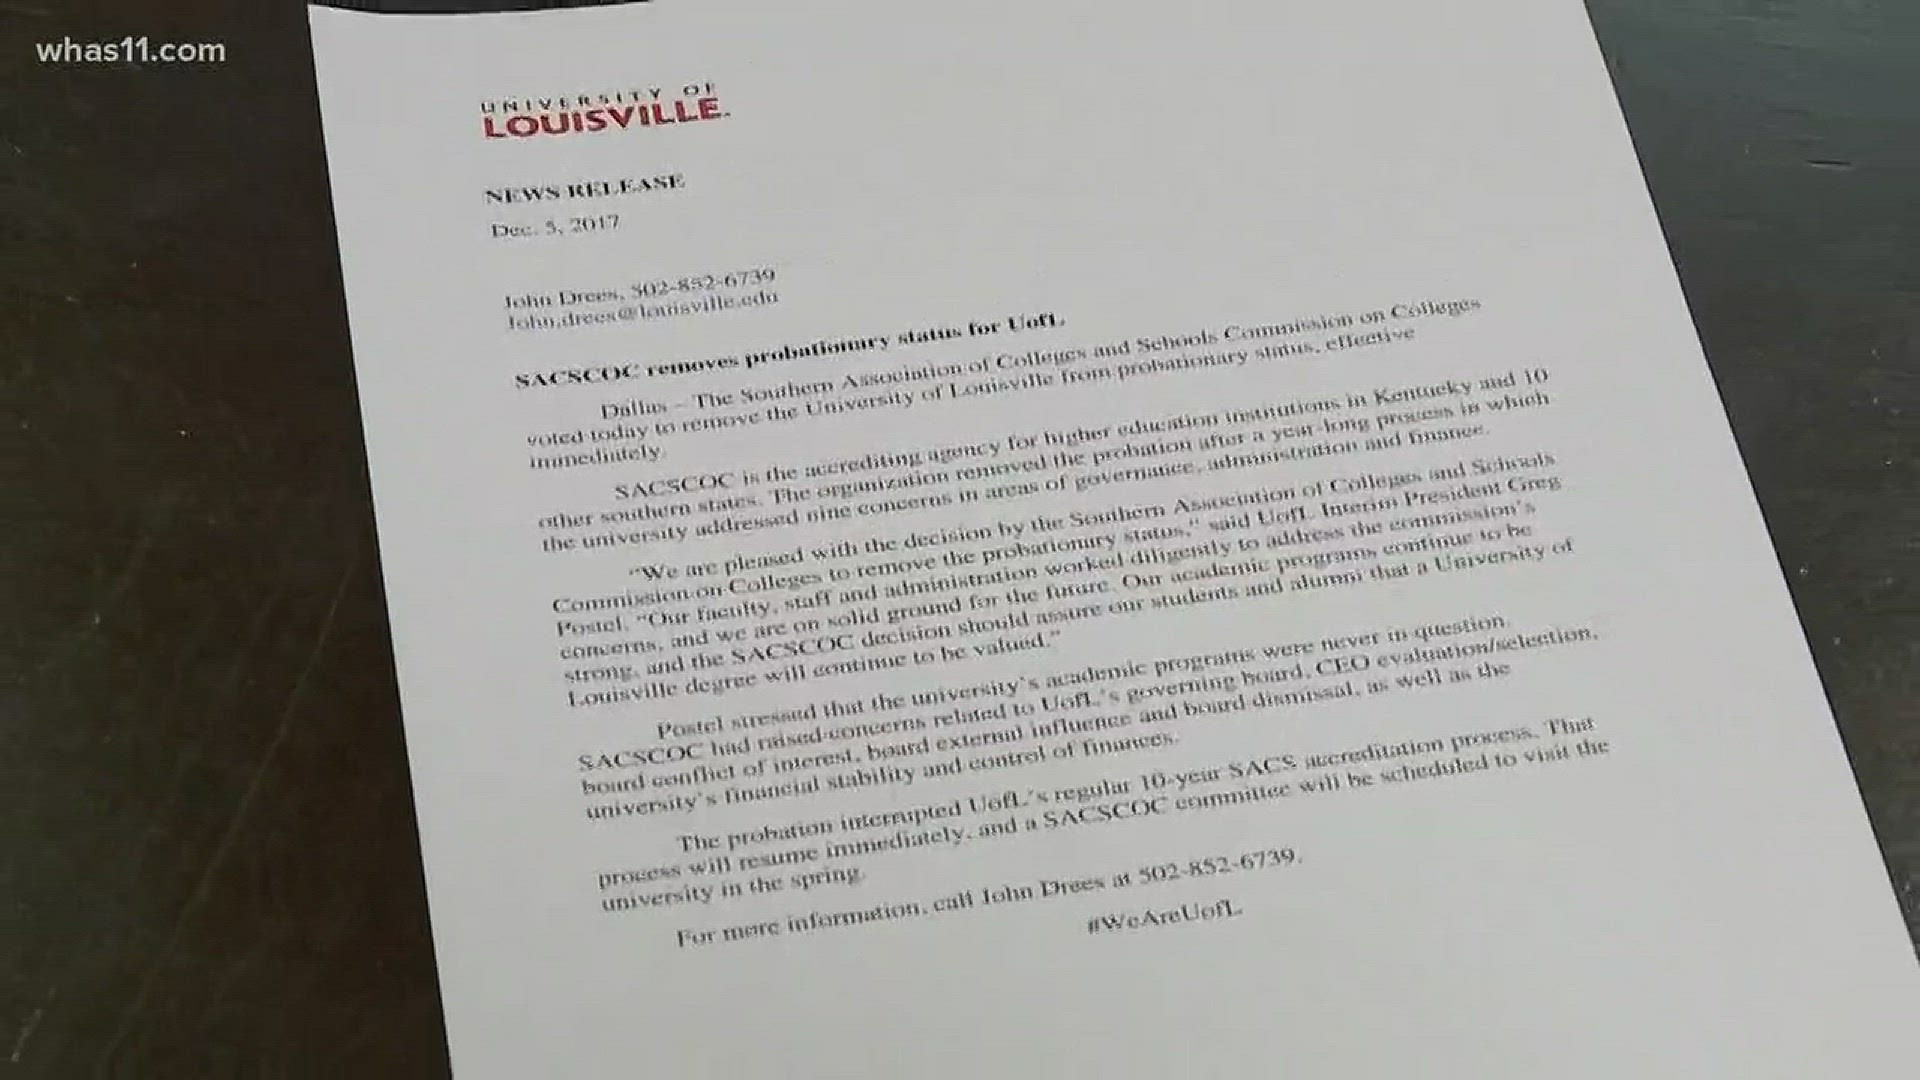 WHAS11's Kayla Moody reports on the University of Louisville shedding its probationary status.